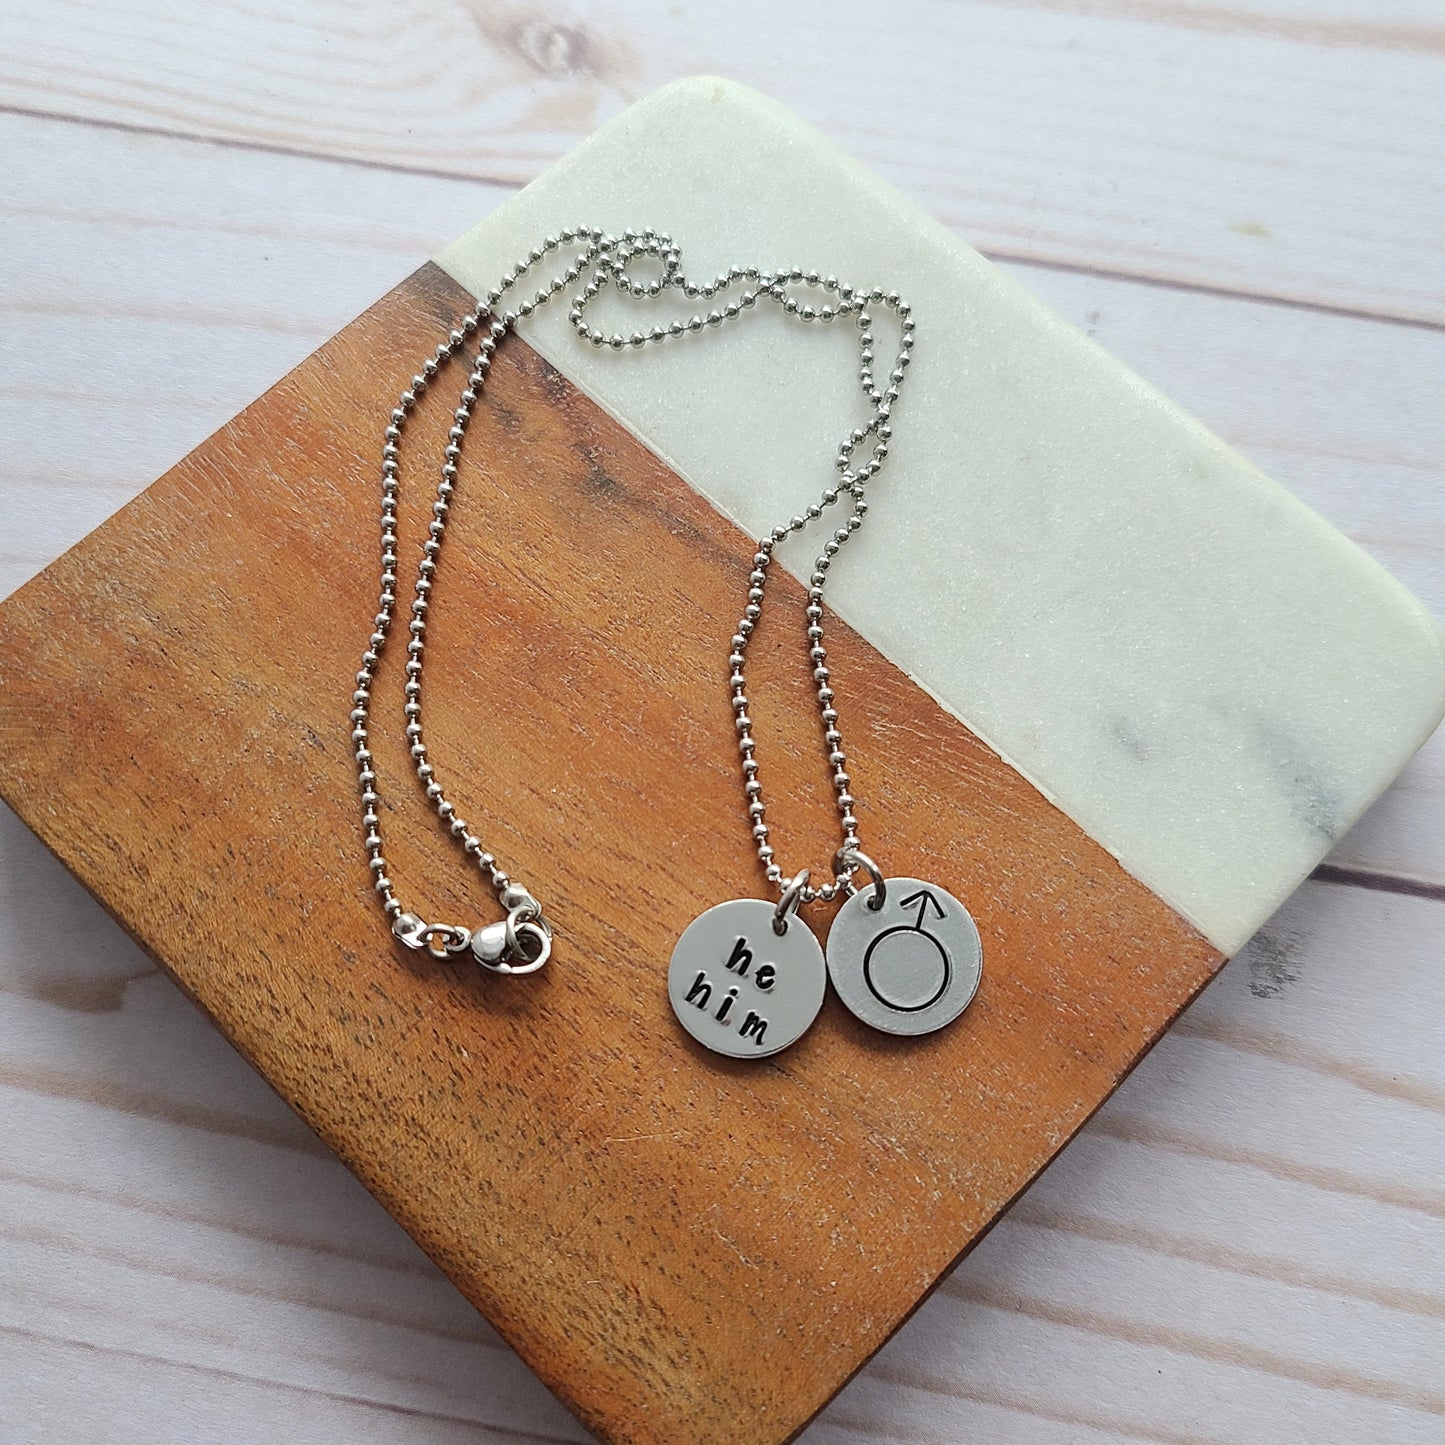 Tiny Disc Pronouns and Gender Symbol Necklace